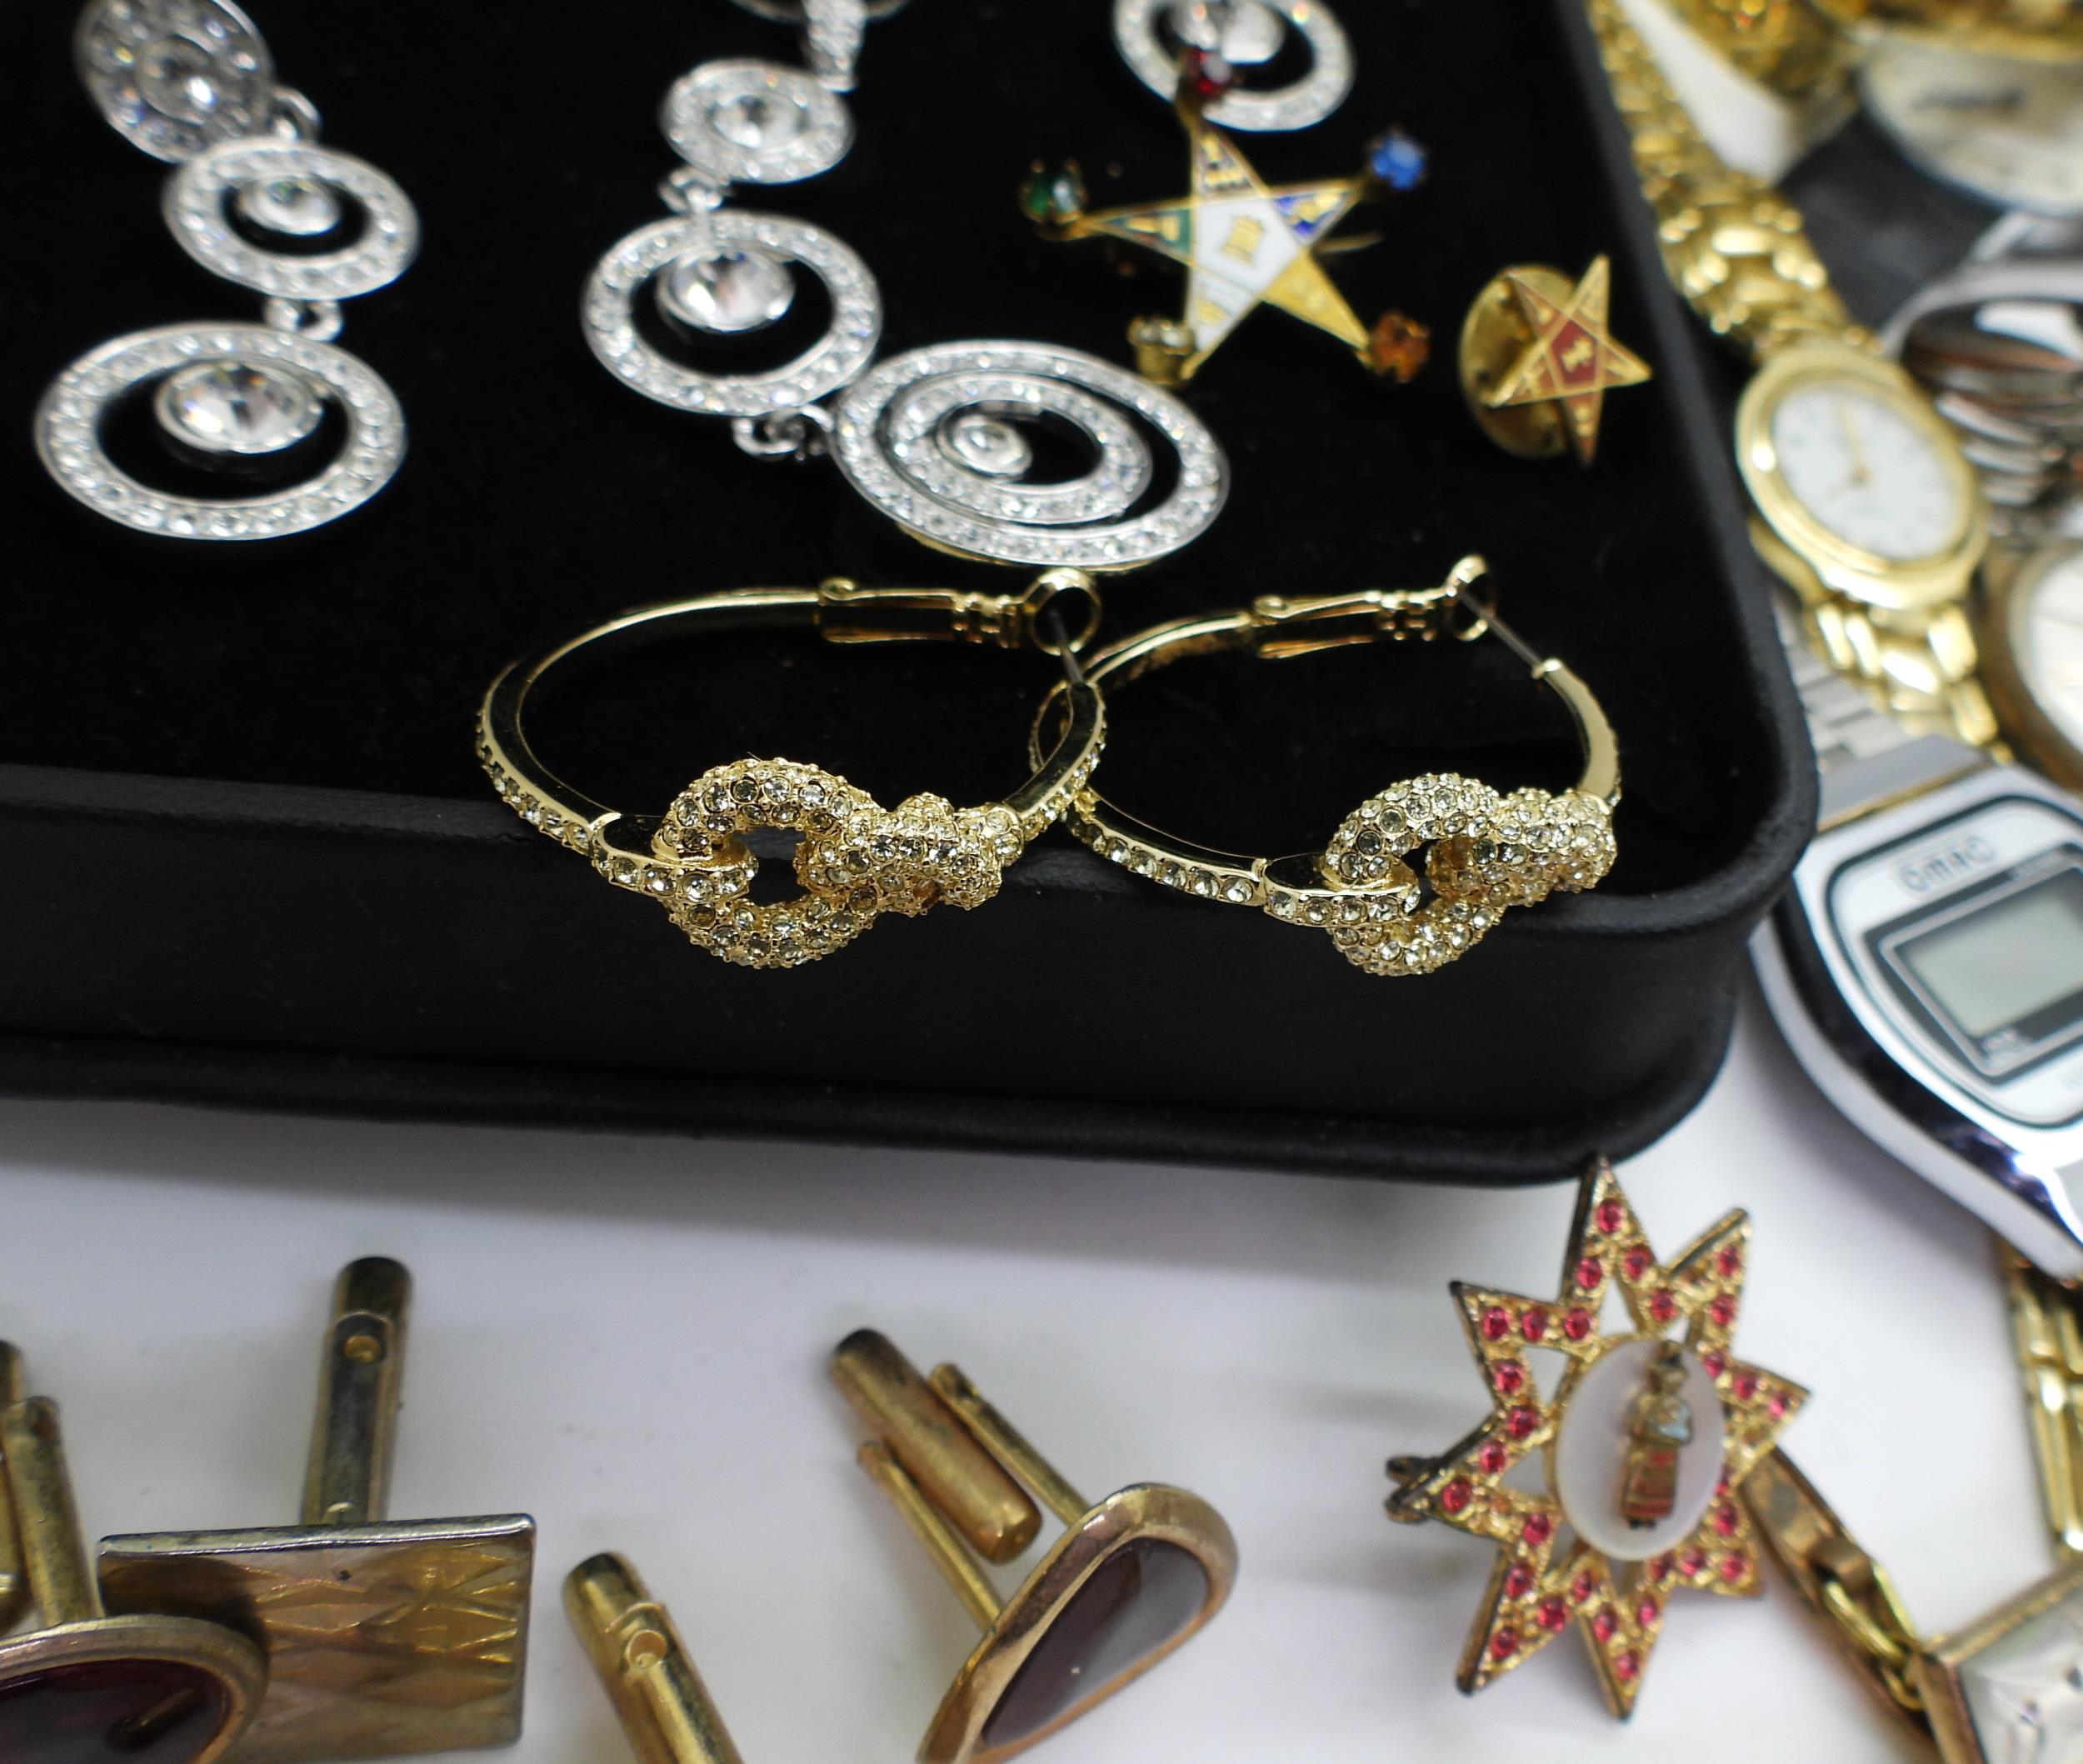 Retro Stratton cufflinks, a boxed Swarovski necklace and earrings, white metal and rolled gold - Image 3 of 5